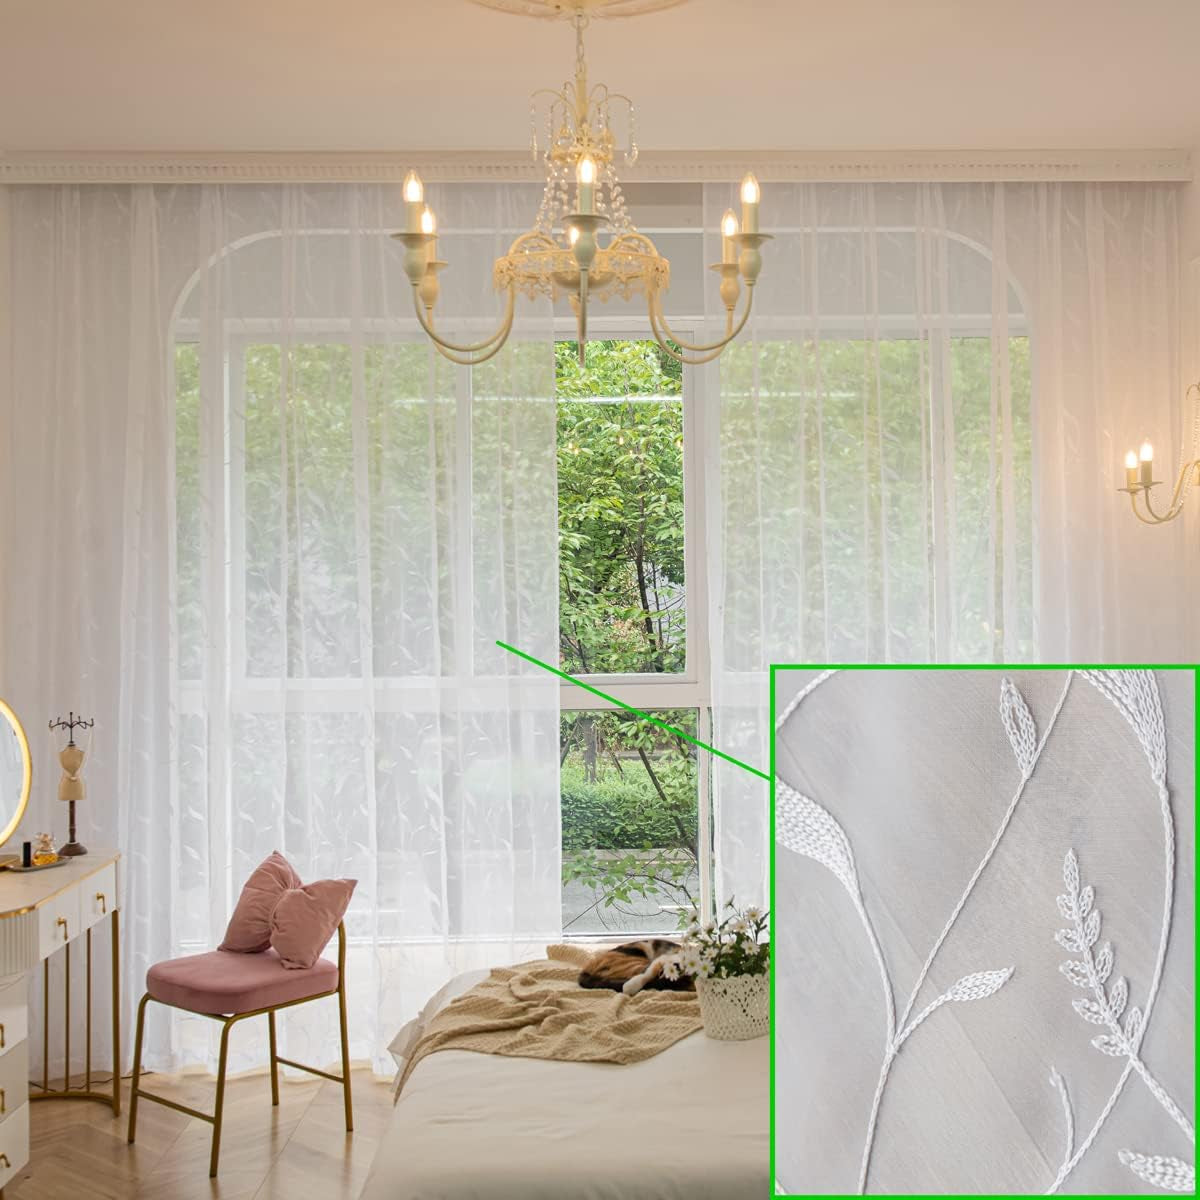 MOONVAN Windows Semi White Sheer Curtains 84 Inches Length 52 Inches Width 2 Panels Set Translucent Sheer Curtain Basic Rod Pocket for Bedroom Children Living Room Yard Kitchen  MOONVAN White-Embroider-Leaf 52''W X 84''L 